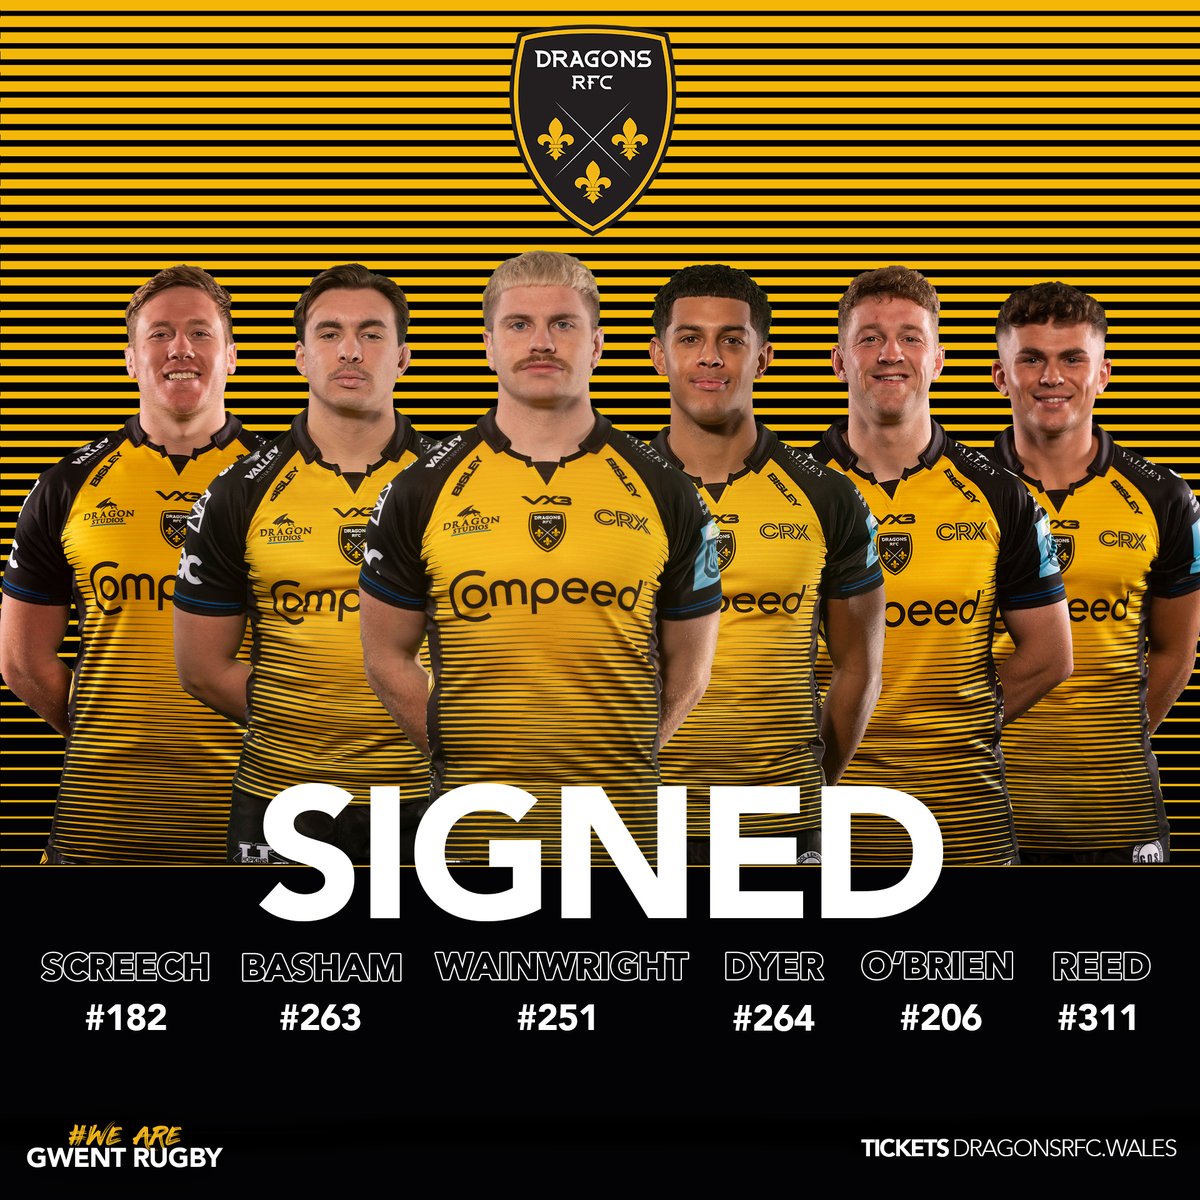 💥 𝙎𝙐𝙋𝙀𝙍 𝙎𝙄𝙓 𝙎𝙄𝙂𝙉 🆙 🙌 These Super Six senior Dragons have re-signed for next season, are you ready to join them? 🔥 🐉 Season Membership Coming 🔜👀 Register your interest today to be the first to hear ⤵️ ▶️ tinyurl.com/ycxh5pub #WeAreGwentRugby